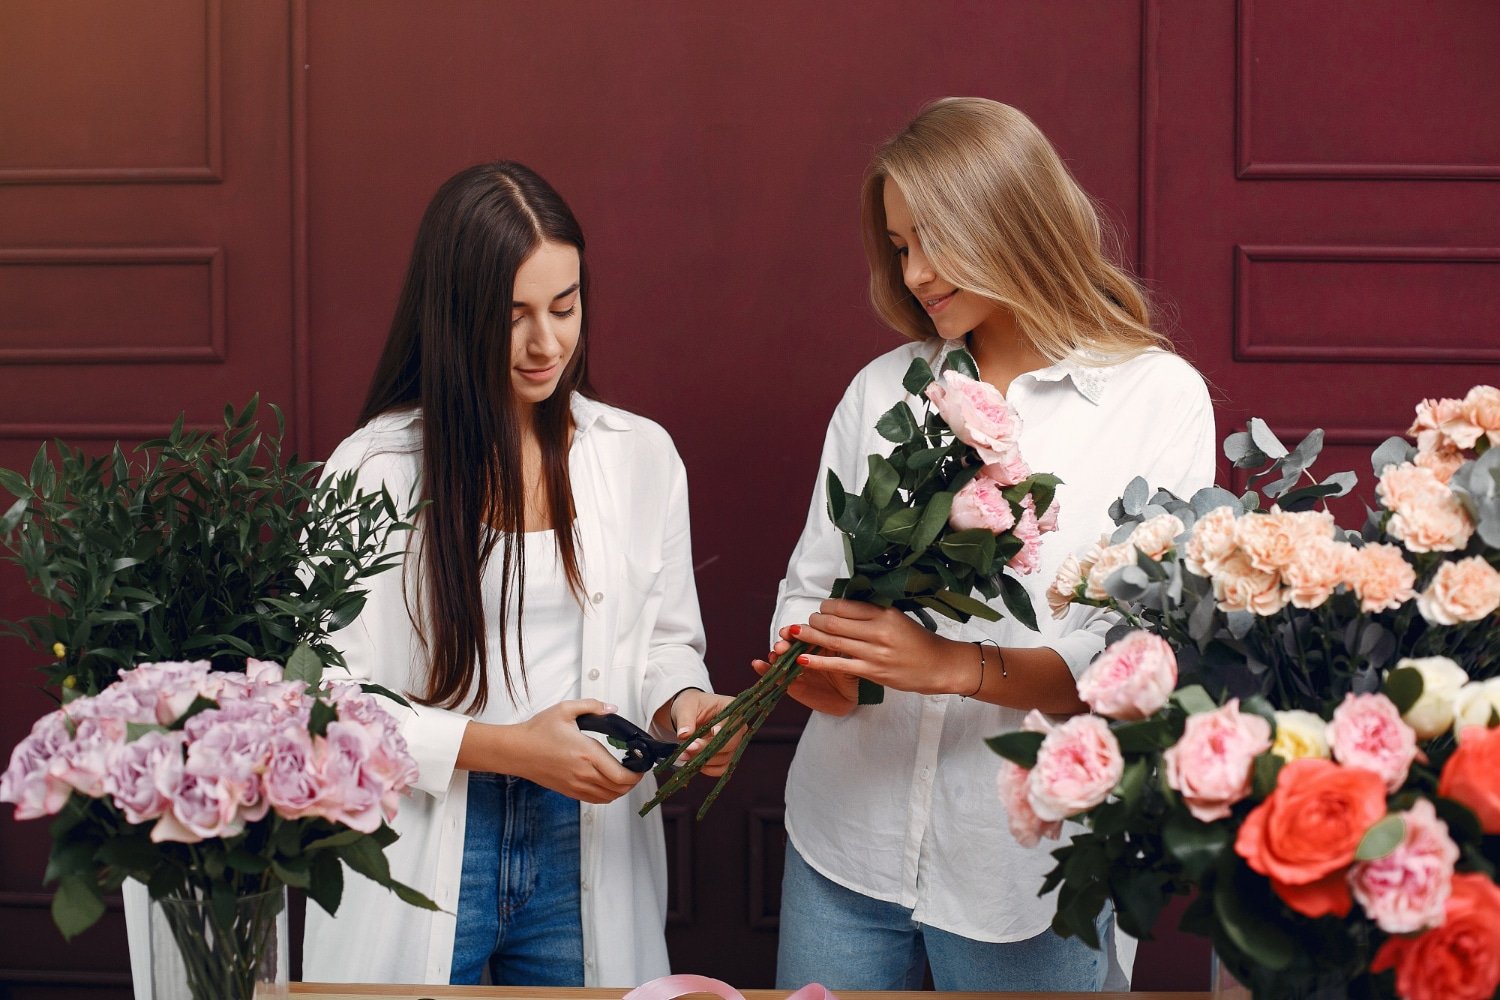 Send Beautiful, Fresh Flowers With Floraly’s Sustainable Flower Delivery Service